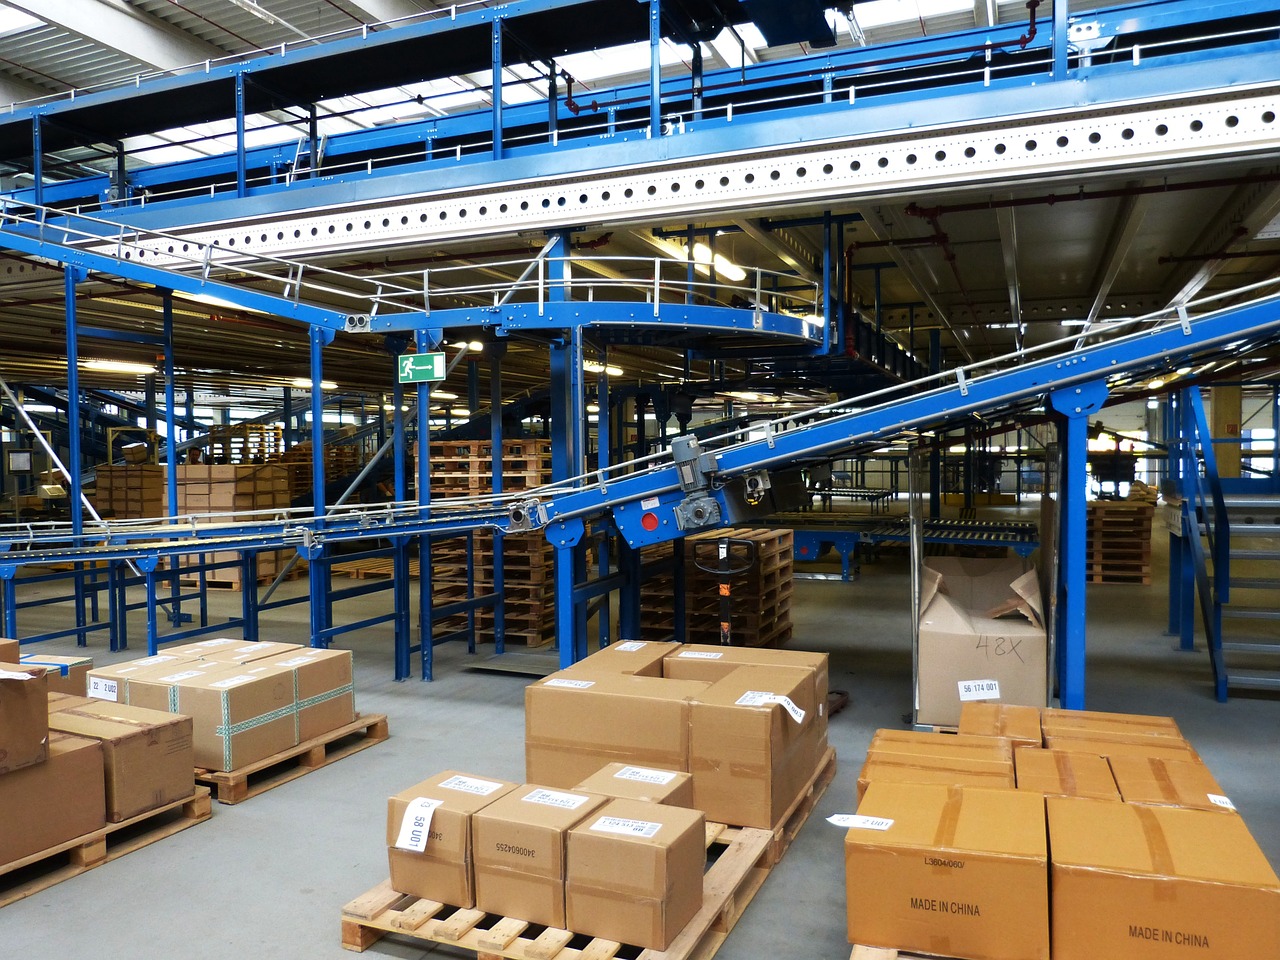 What Are The Most Common Types of Industrial Conveyors